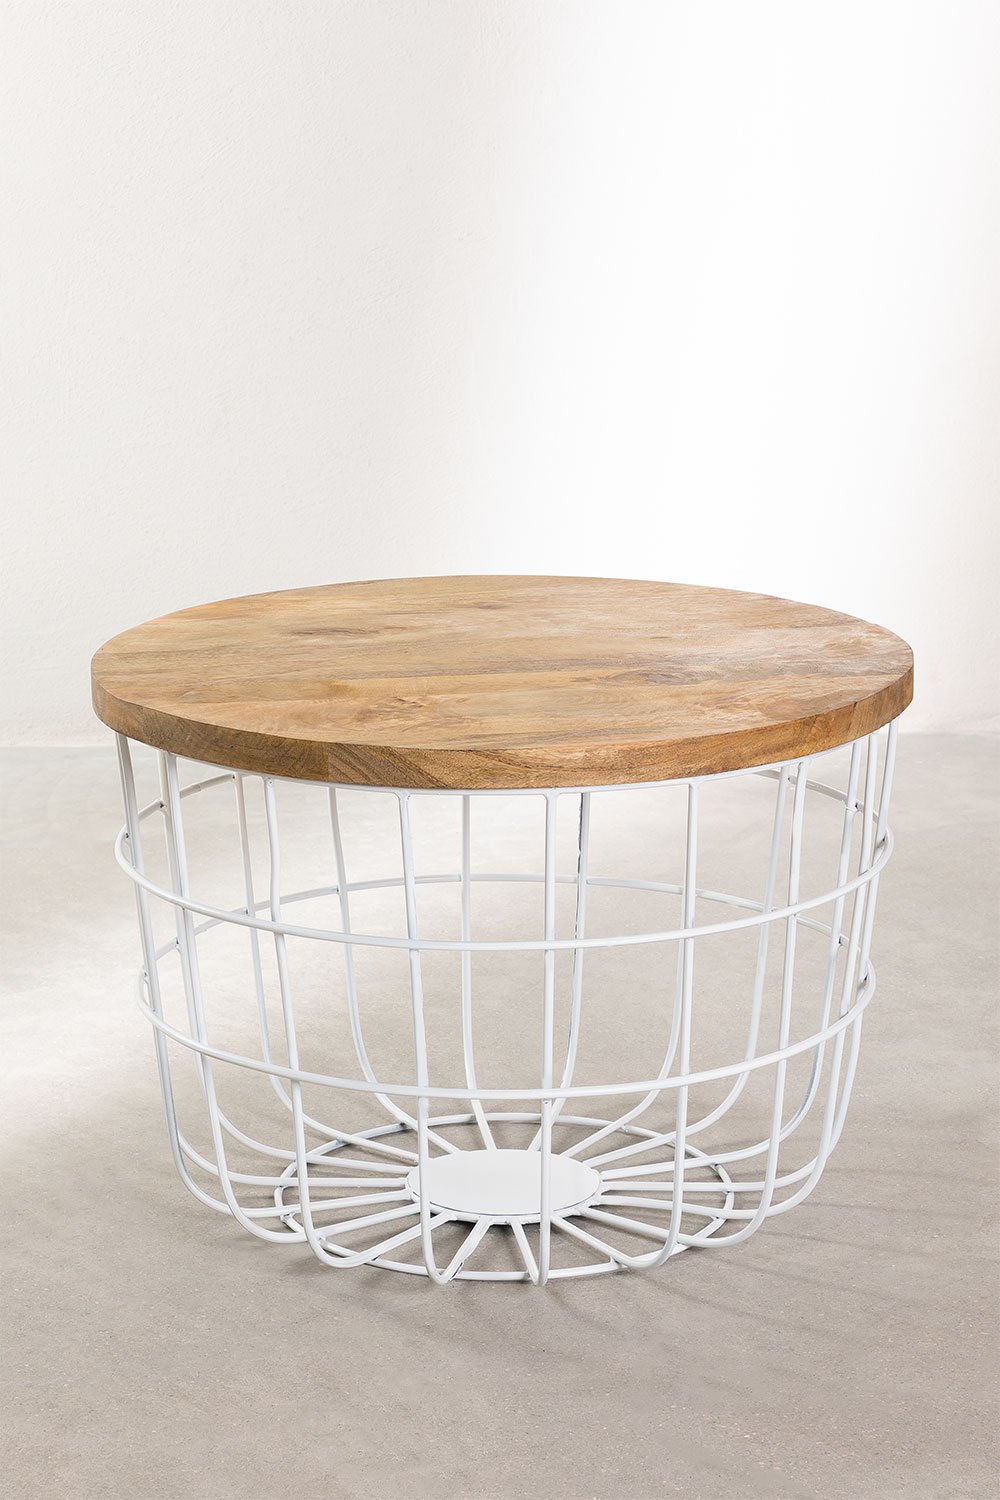 Round Coffee Table in Mango Wood and Steel (Ø62 cm) Ket, gallery image 1